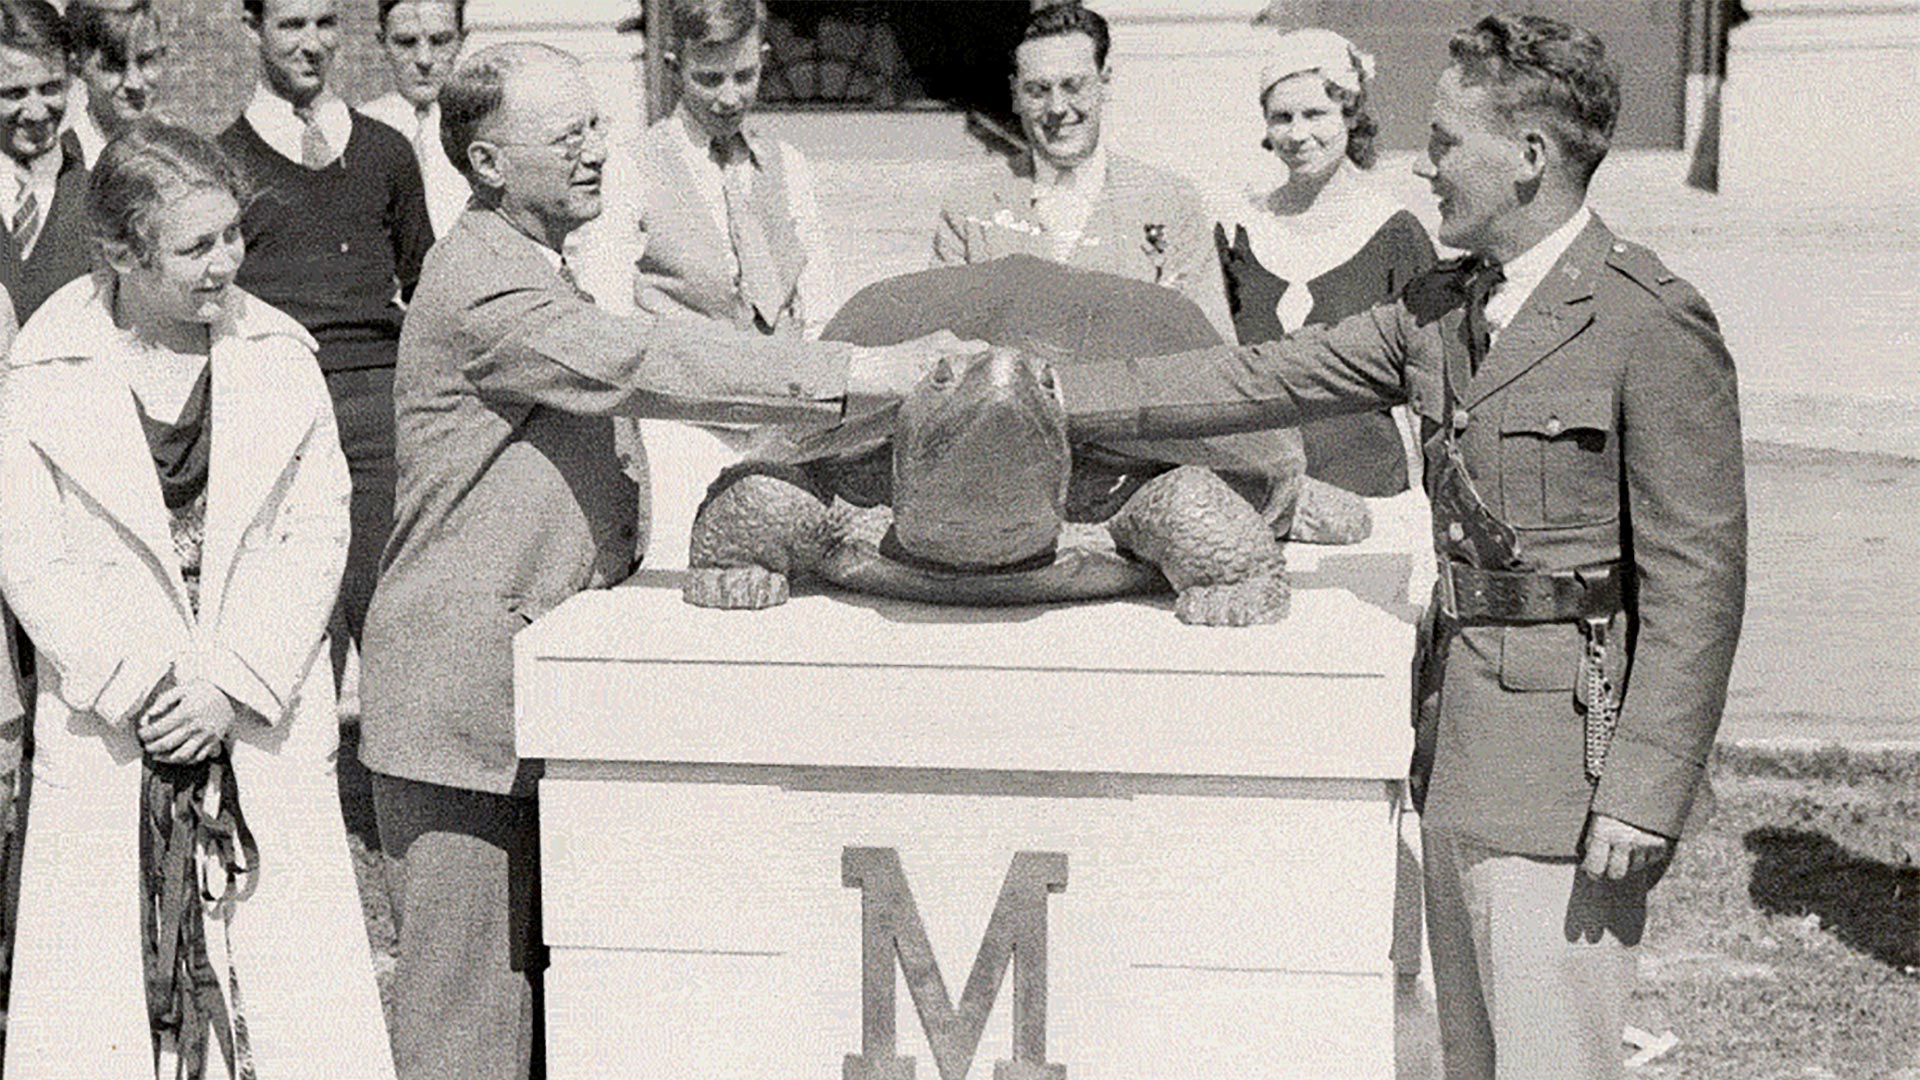 Testudo has been a symbol for UMD to rally around (and defend from students of other colleges, who stole the original sculpture more than once) for nine decades. Photos courtesy of University Archives.